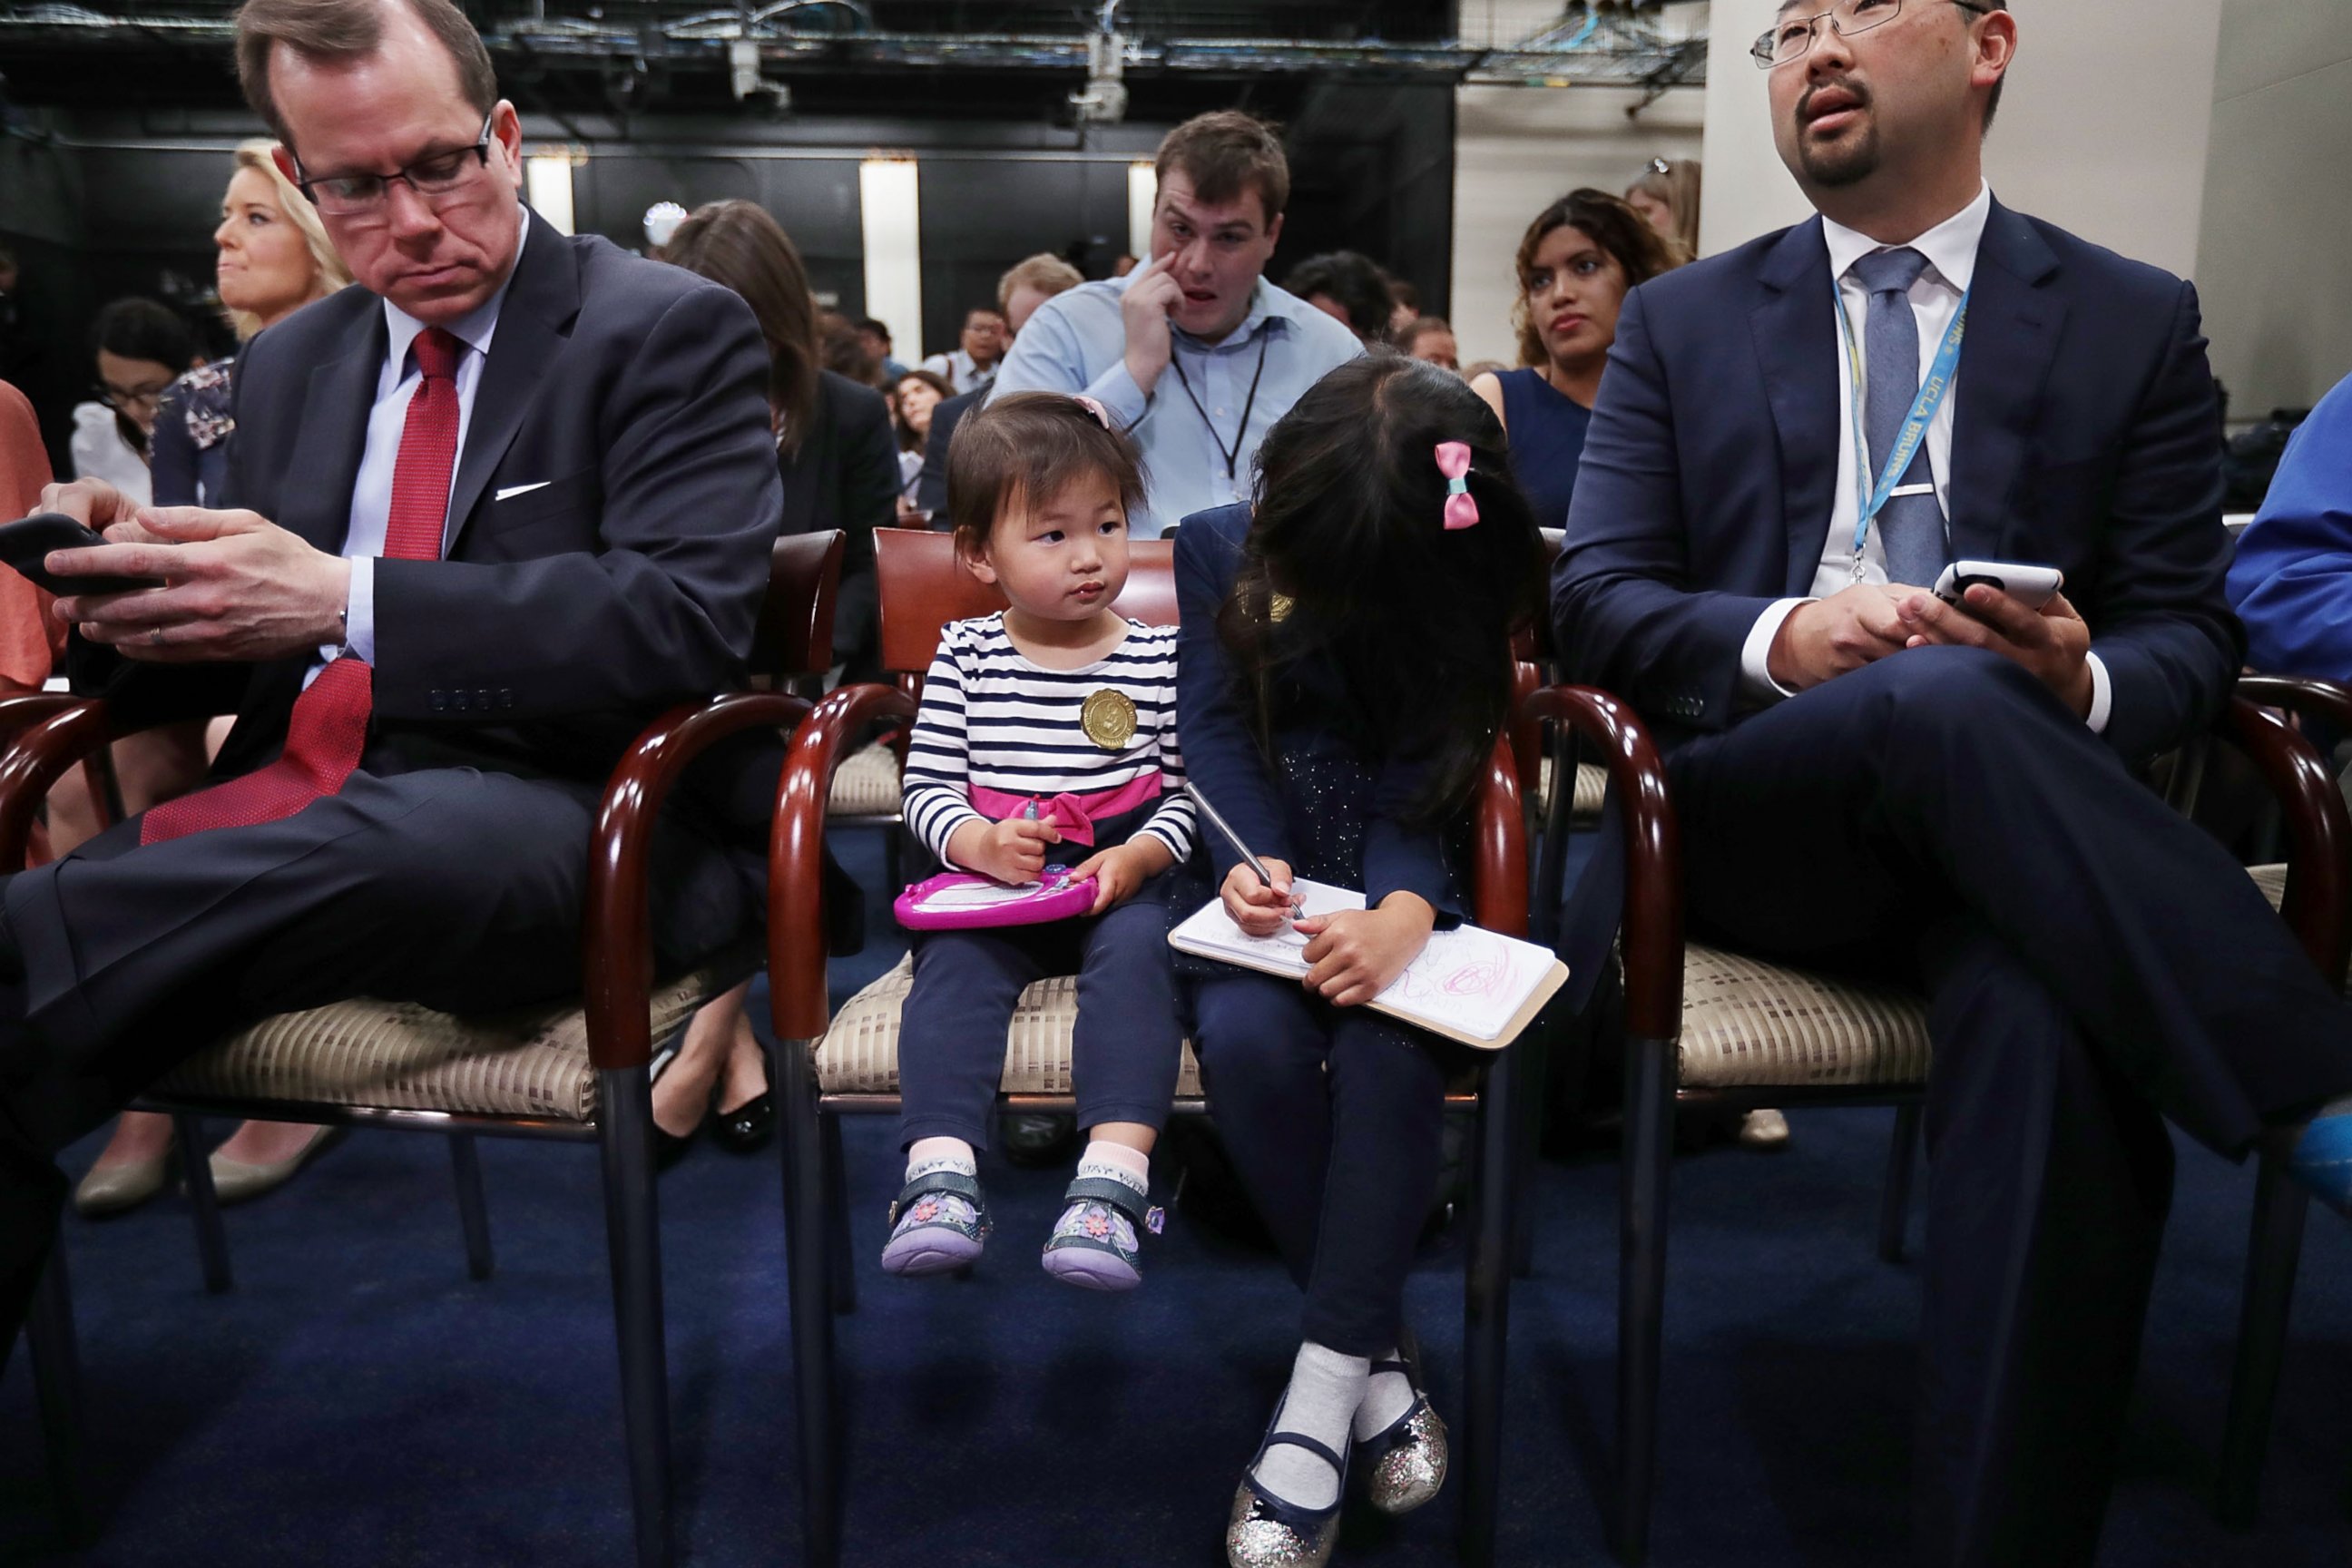 PHOTO: The Hill reporter Scott Wong, right, sits with his daughters, Olivia and Abby, who participated in Take Our Daughters and Sons To Work Day as many journalists took their children to the U.S. Capitol. 